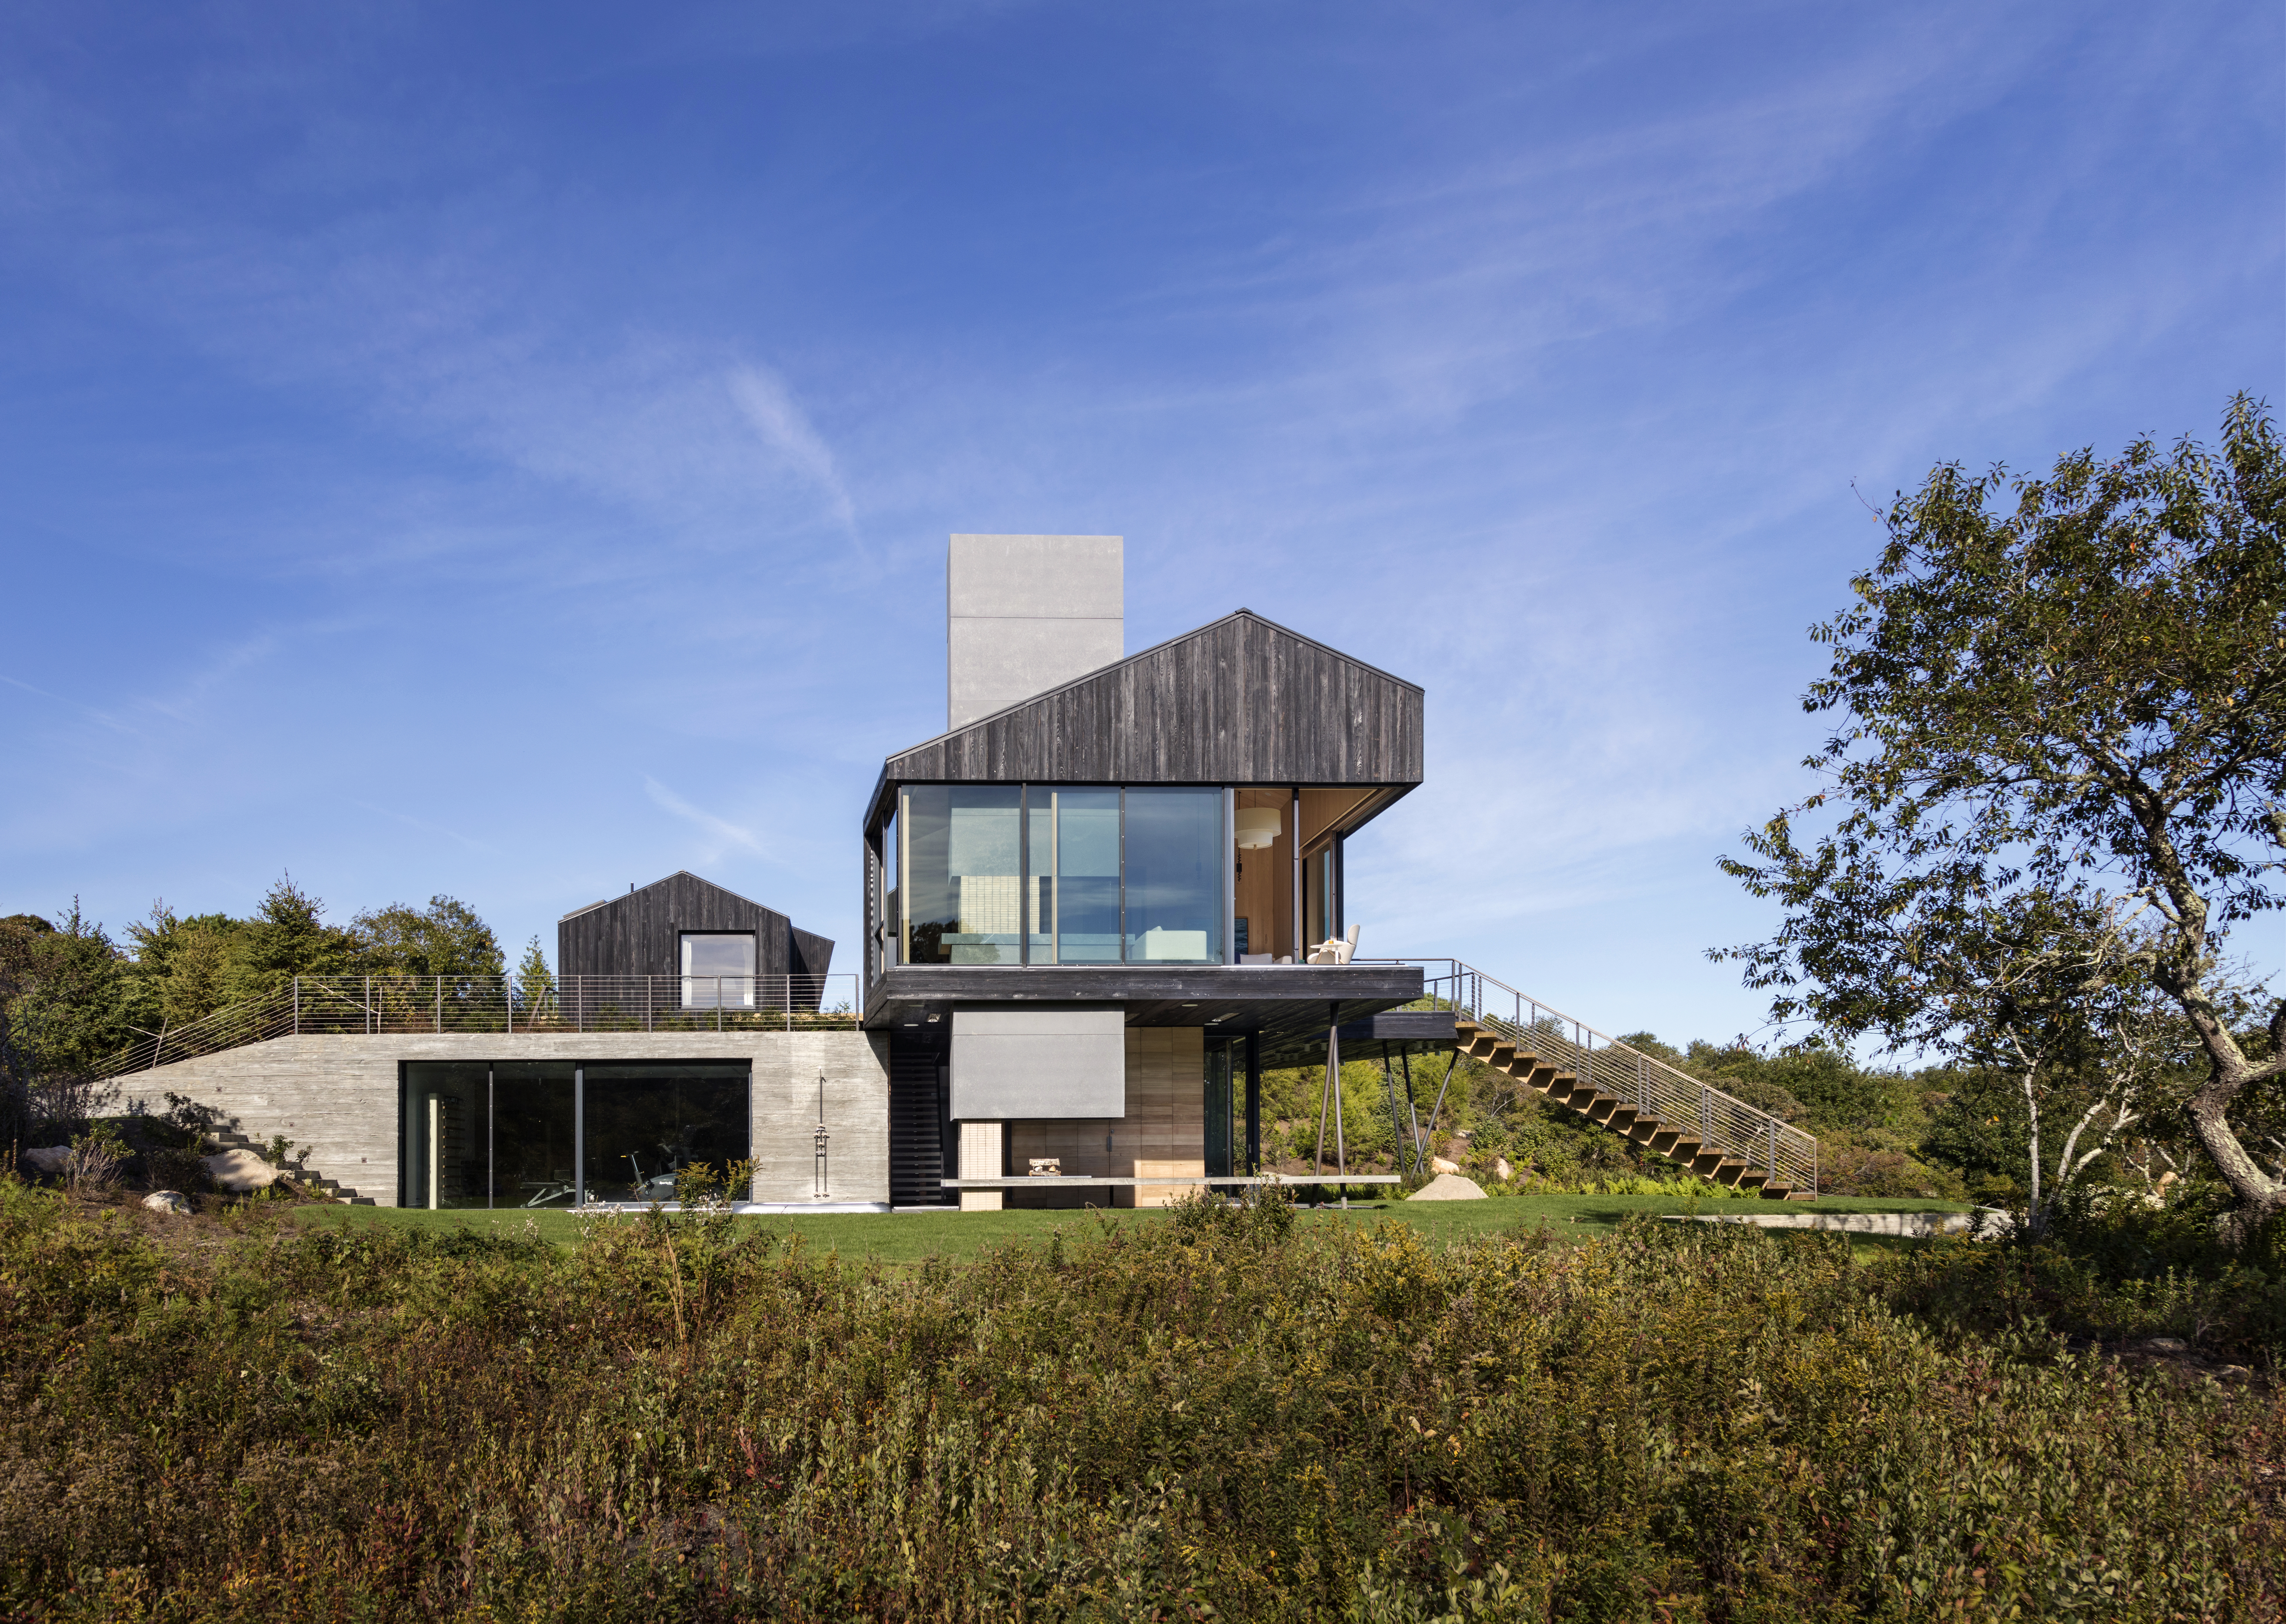 The firm worked with Organschi’s Aaron Schiller of Schiller Projects to develop the Chilmark House, Schiller’s family compound in Martha’s Vineyard.